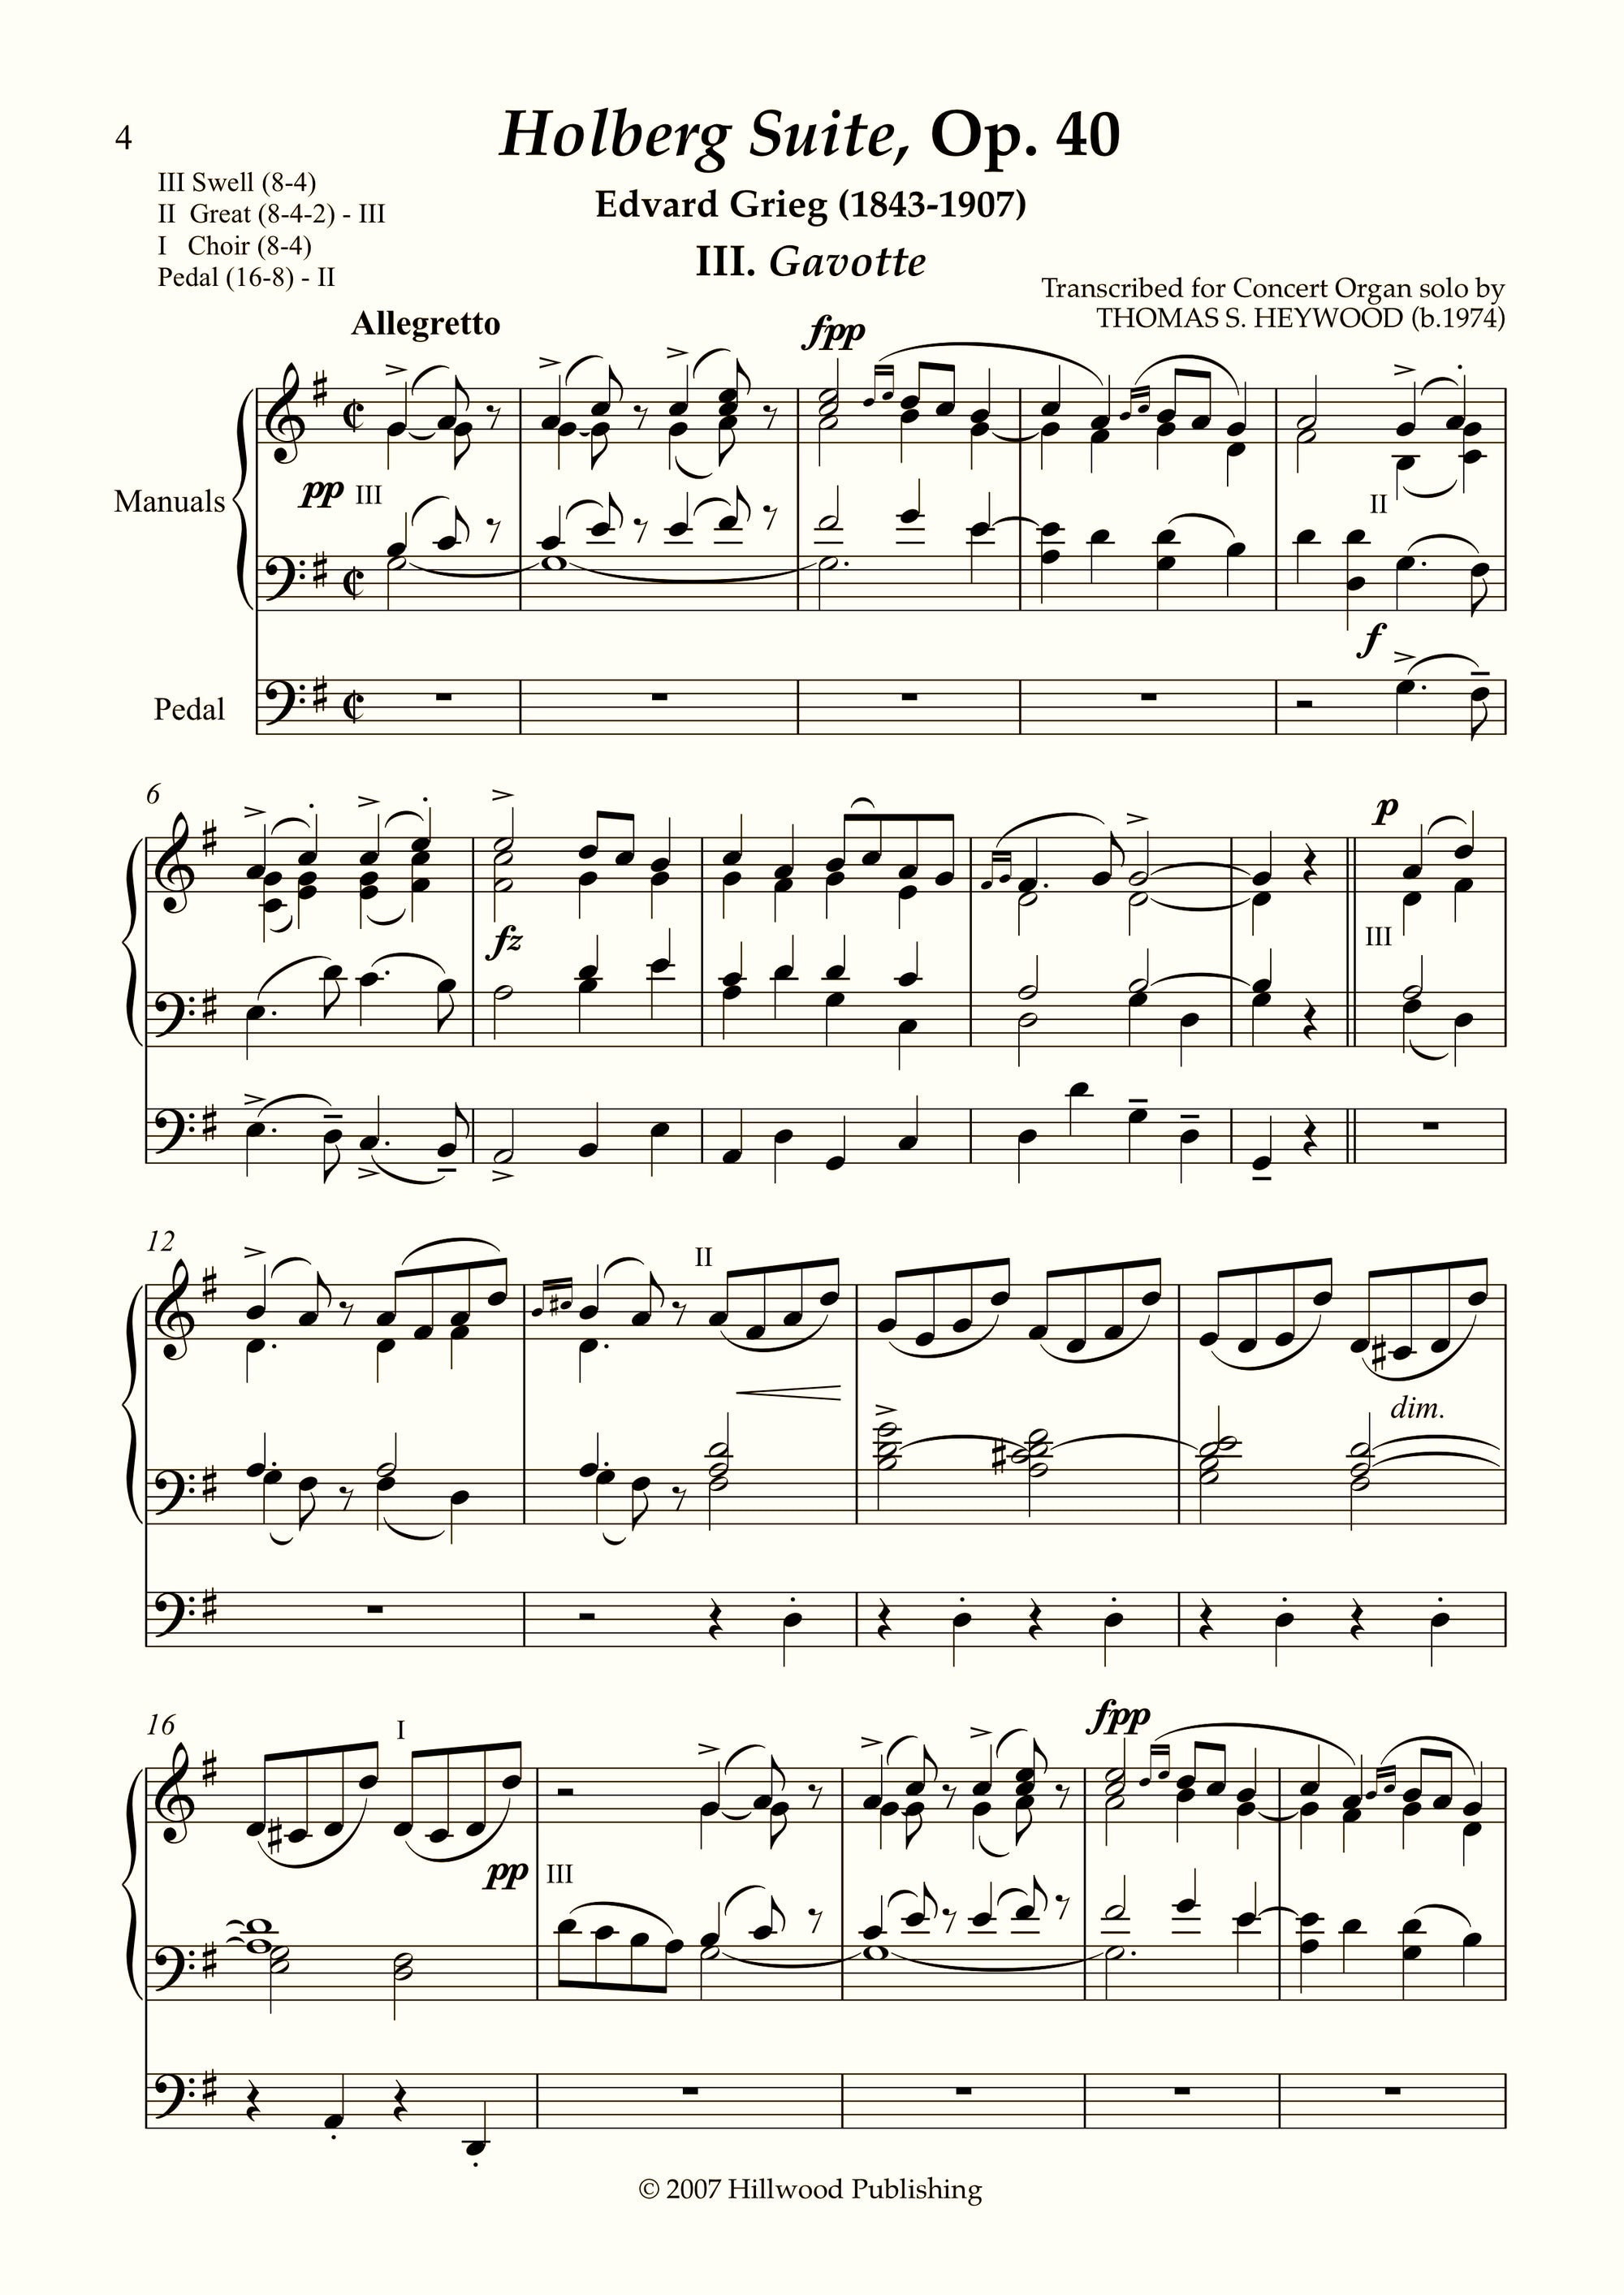 Grieg/Heywood - Gavotte from the Holberg Suite, Op. 40 (Score)